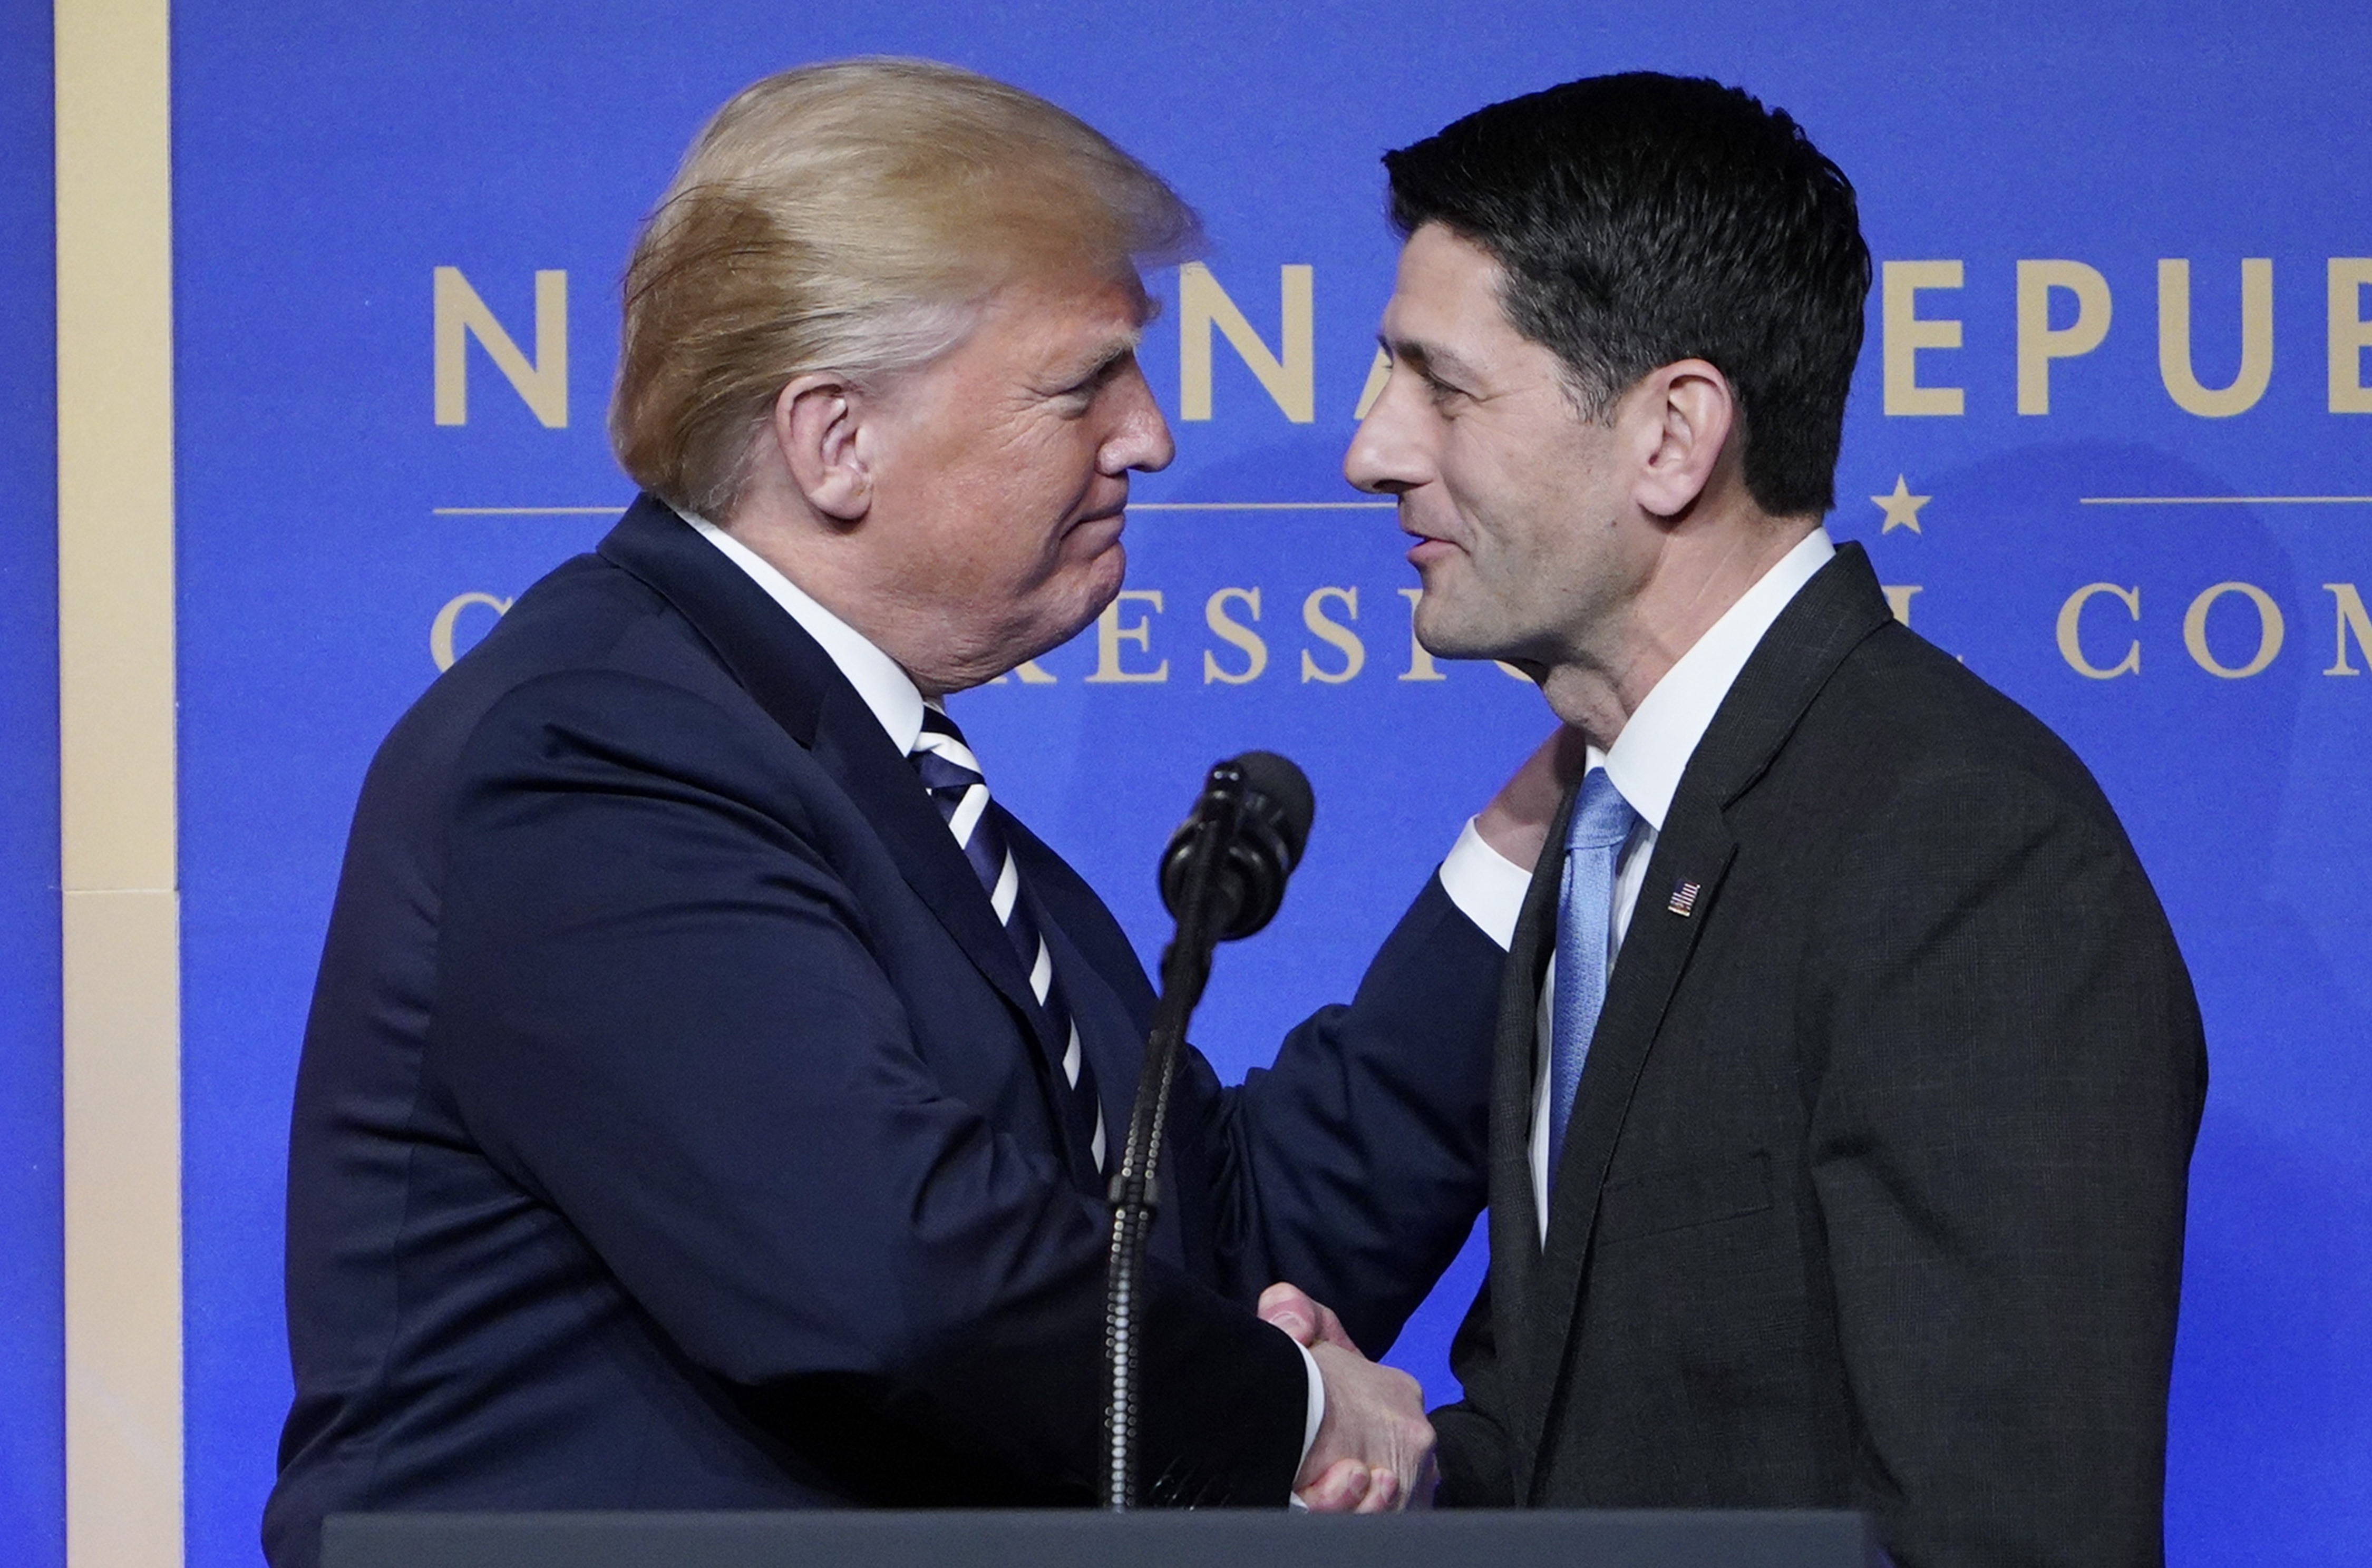 House Speaks Paul Ryan greets US President Donald Trump as he arrives on stage to speak at the National Republican Congressional Committee March Dinner at the National Building Museum on March 20, 2018 in Washington, DC. / AFP PHOTO / MANDEL NGAN (Photo credit should read MANDEL NGAN/AFP/Getty Images)